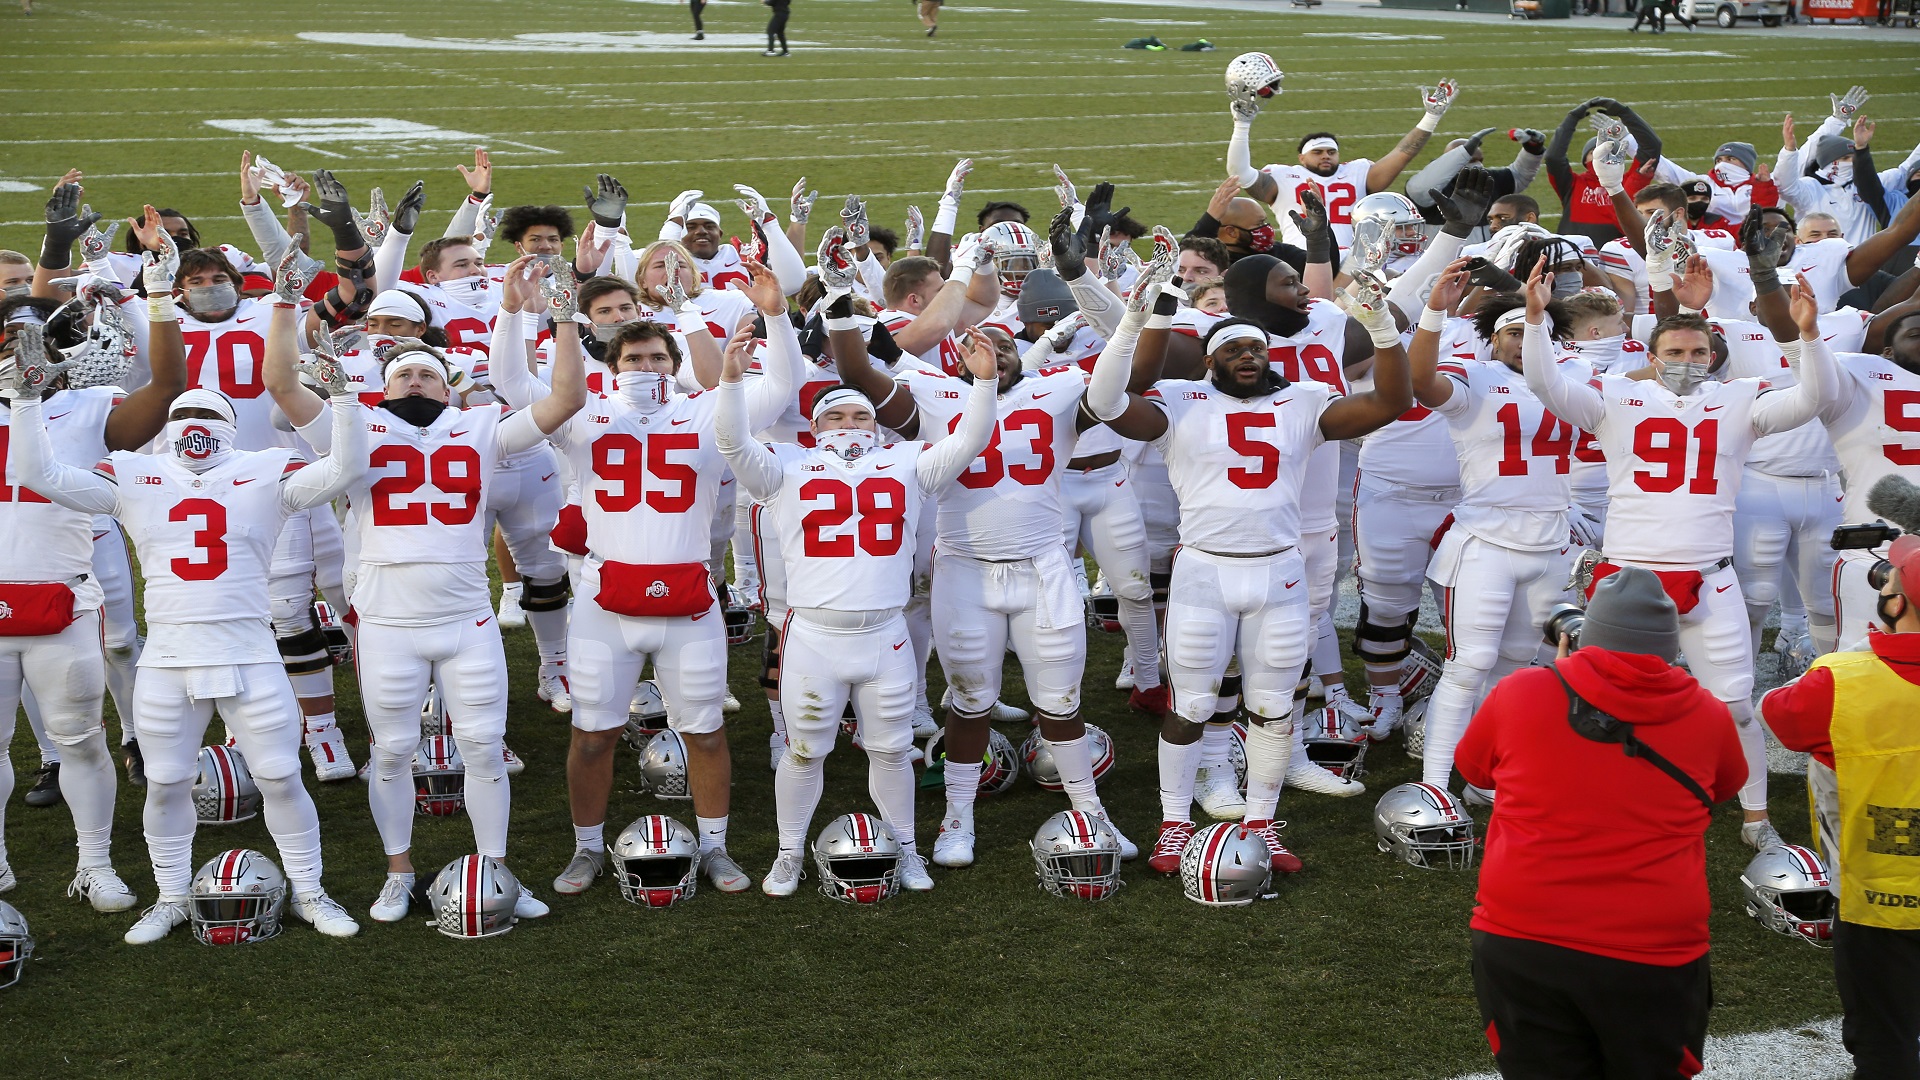 A group of football players celebrating.